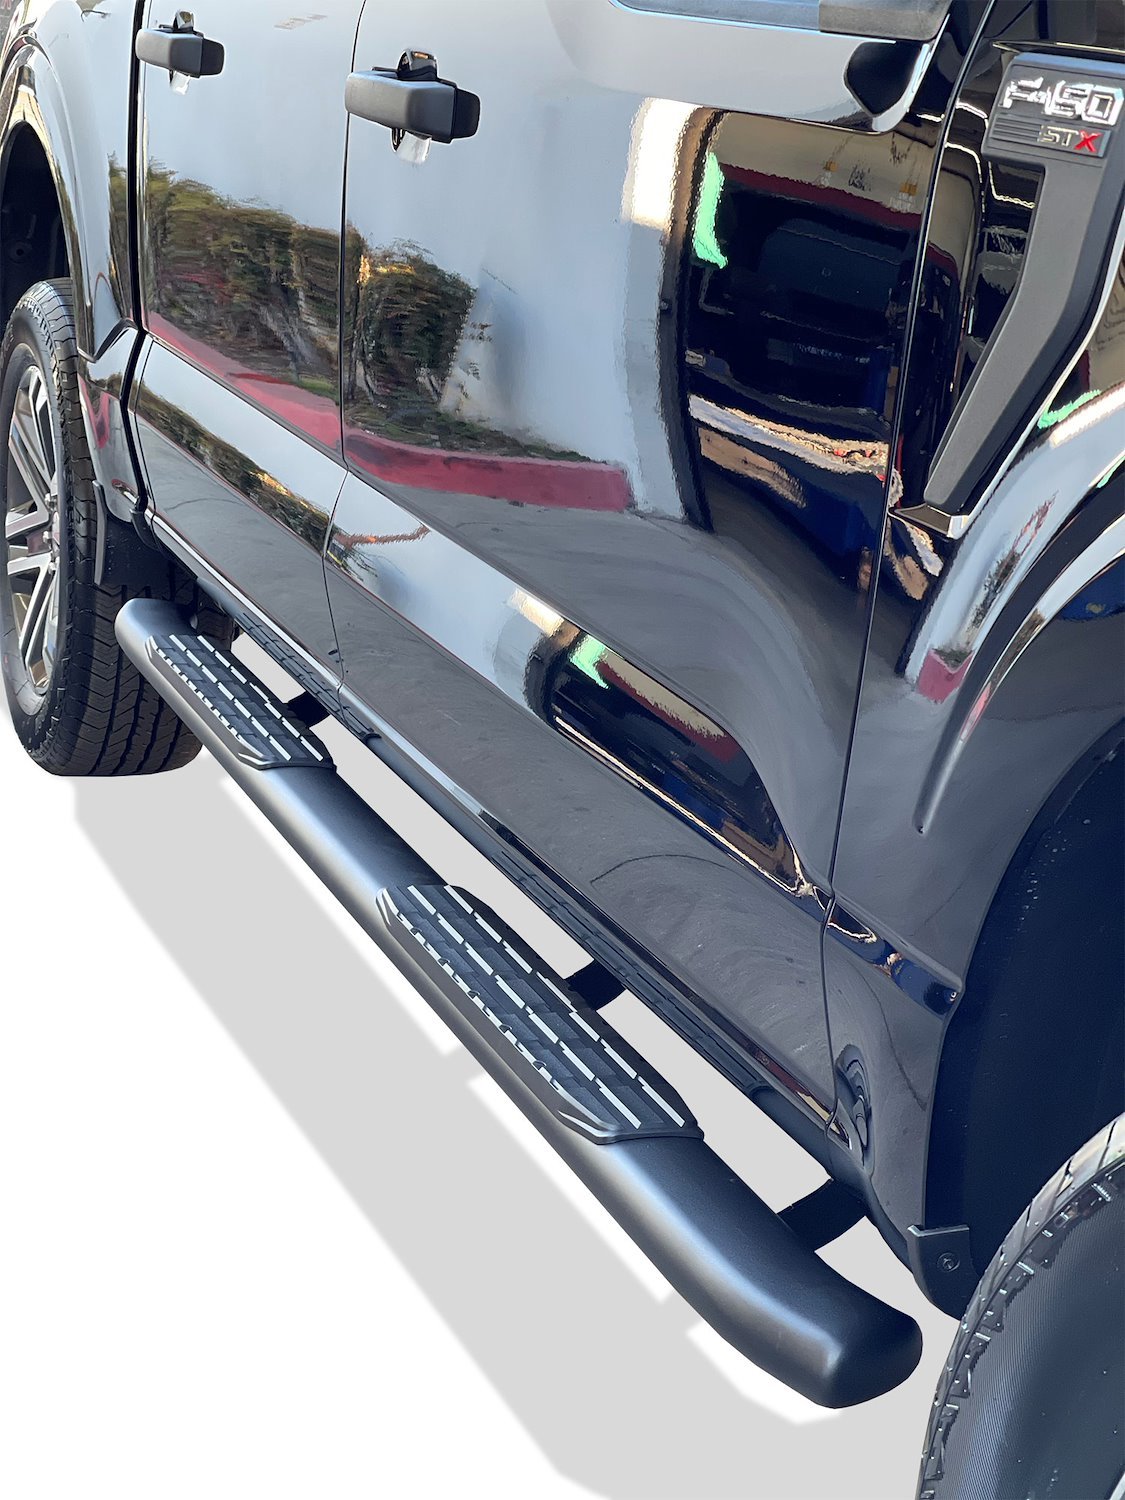 4X Series 4" Oval Side Bars 2015-2017 Ford F-150/250/350/450 SuperCrew